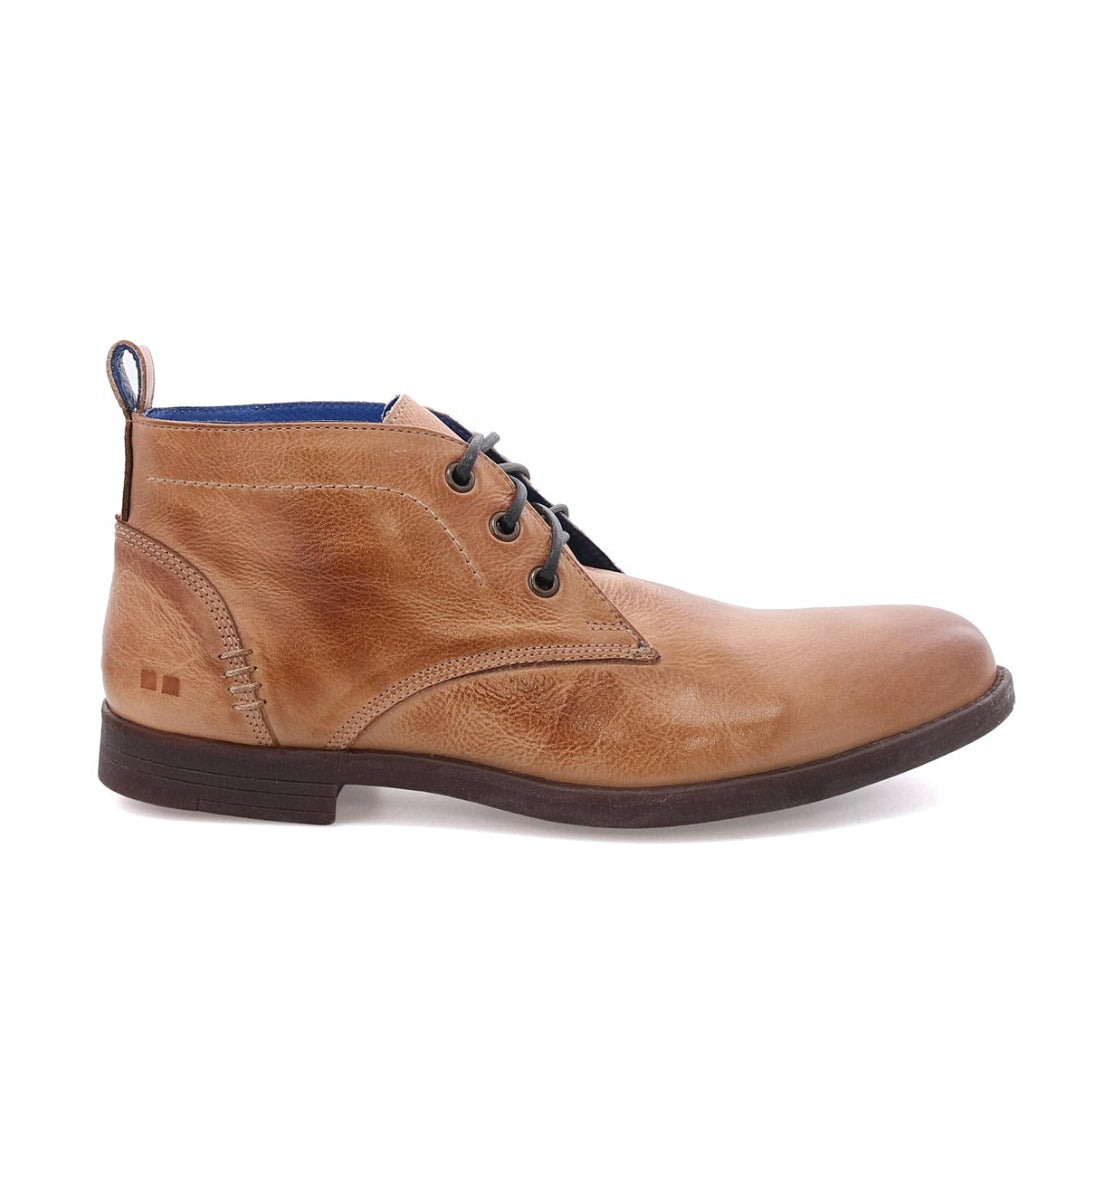 A side view of a light brown Illiad vegetable-tanned leather boot with dark laces on a white background by Bed Stu.